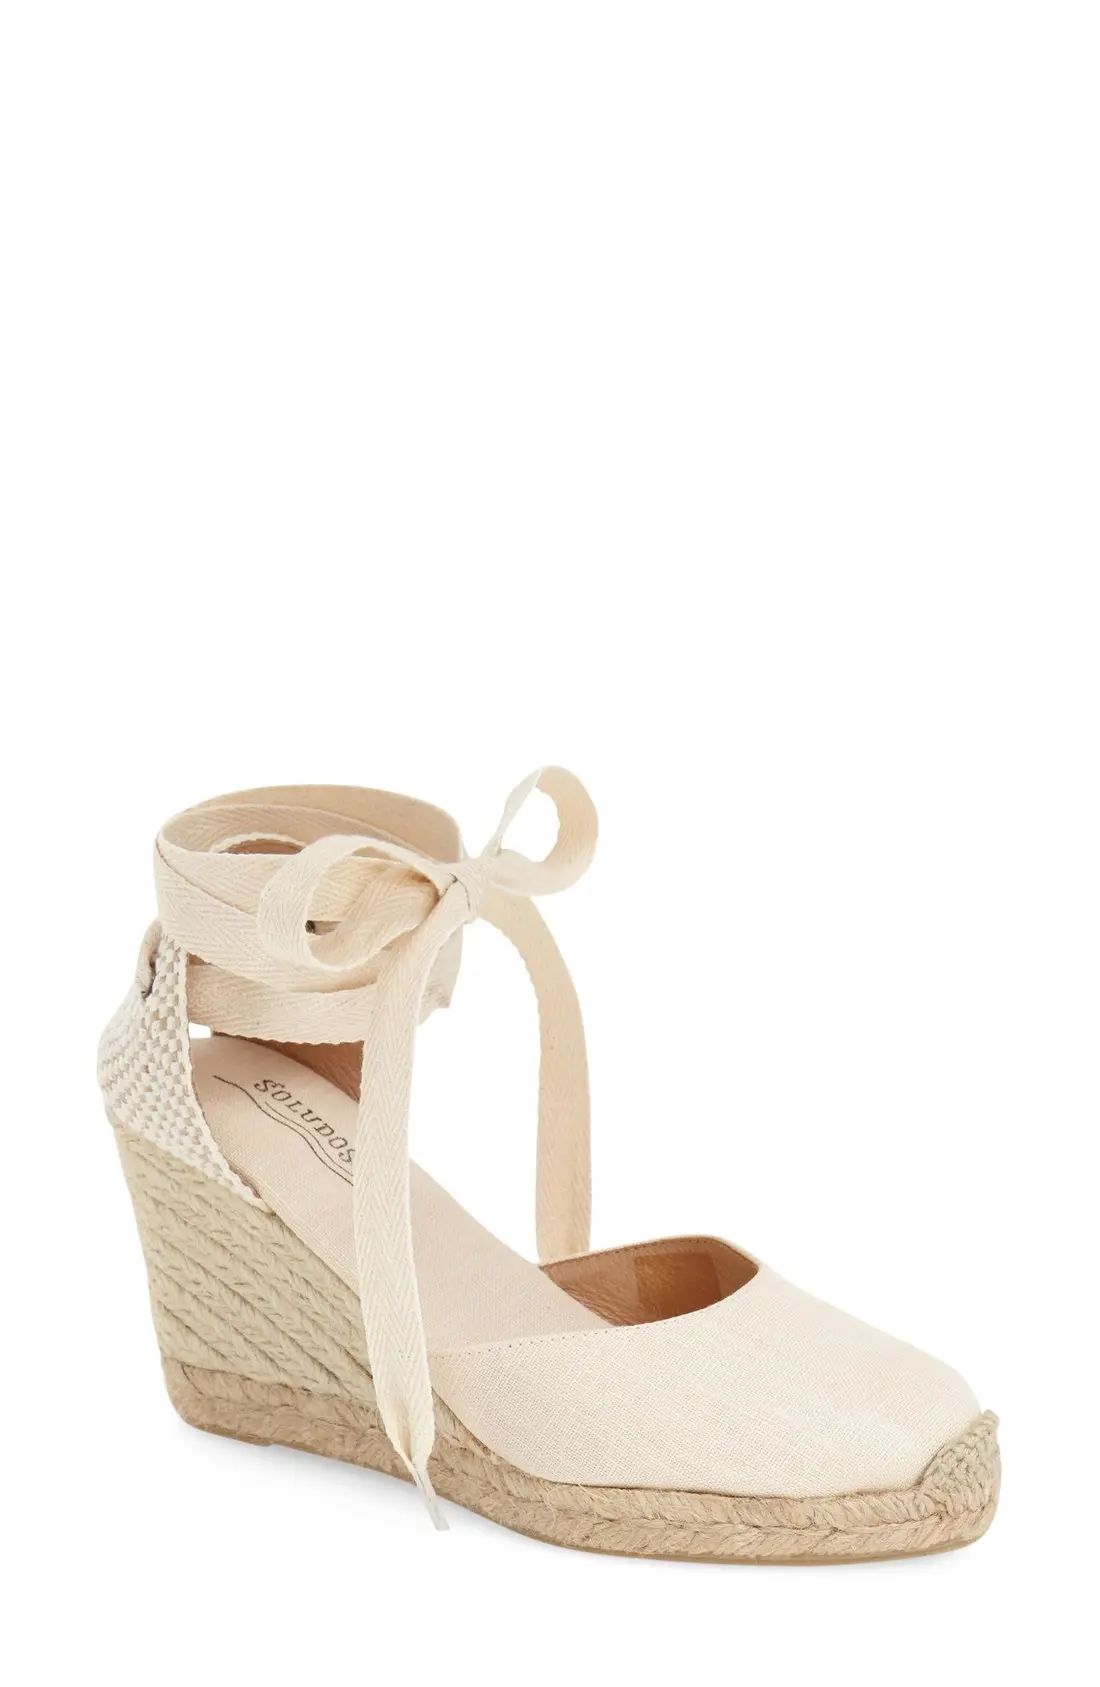 Women's Soludos Wedge Lace-Up Espadrille Sandal, Size 8 M - Beige | Nordstrom